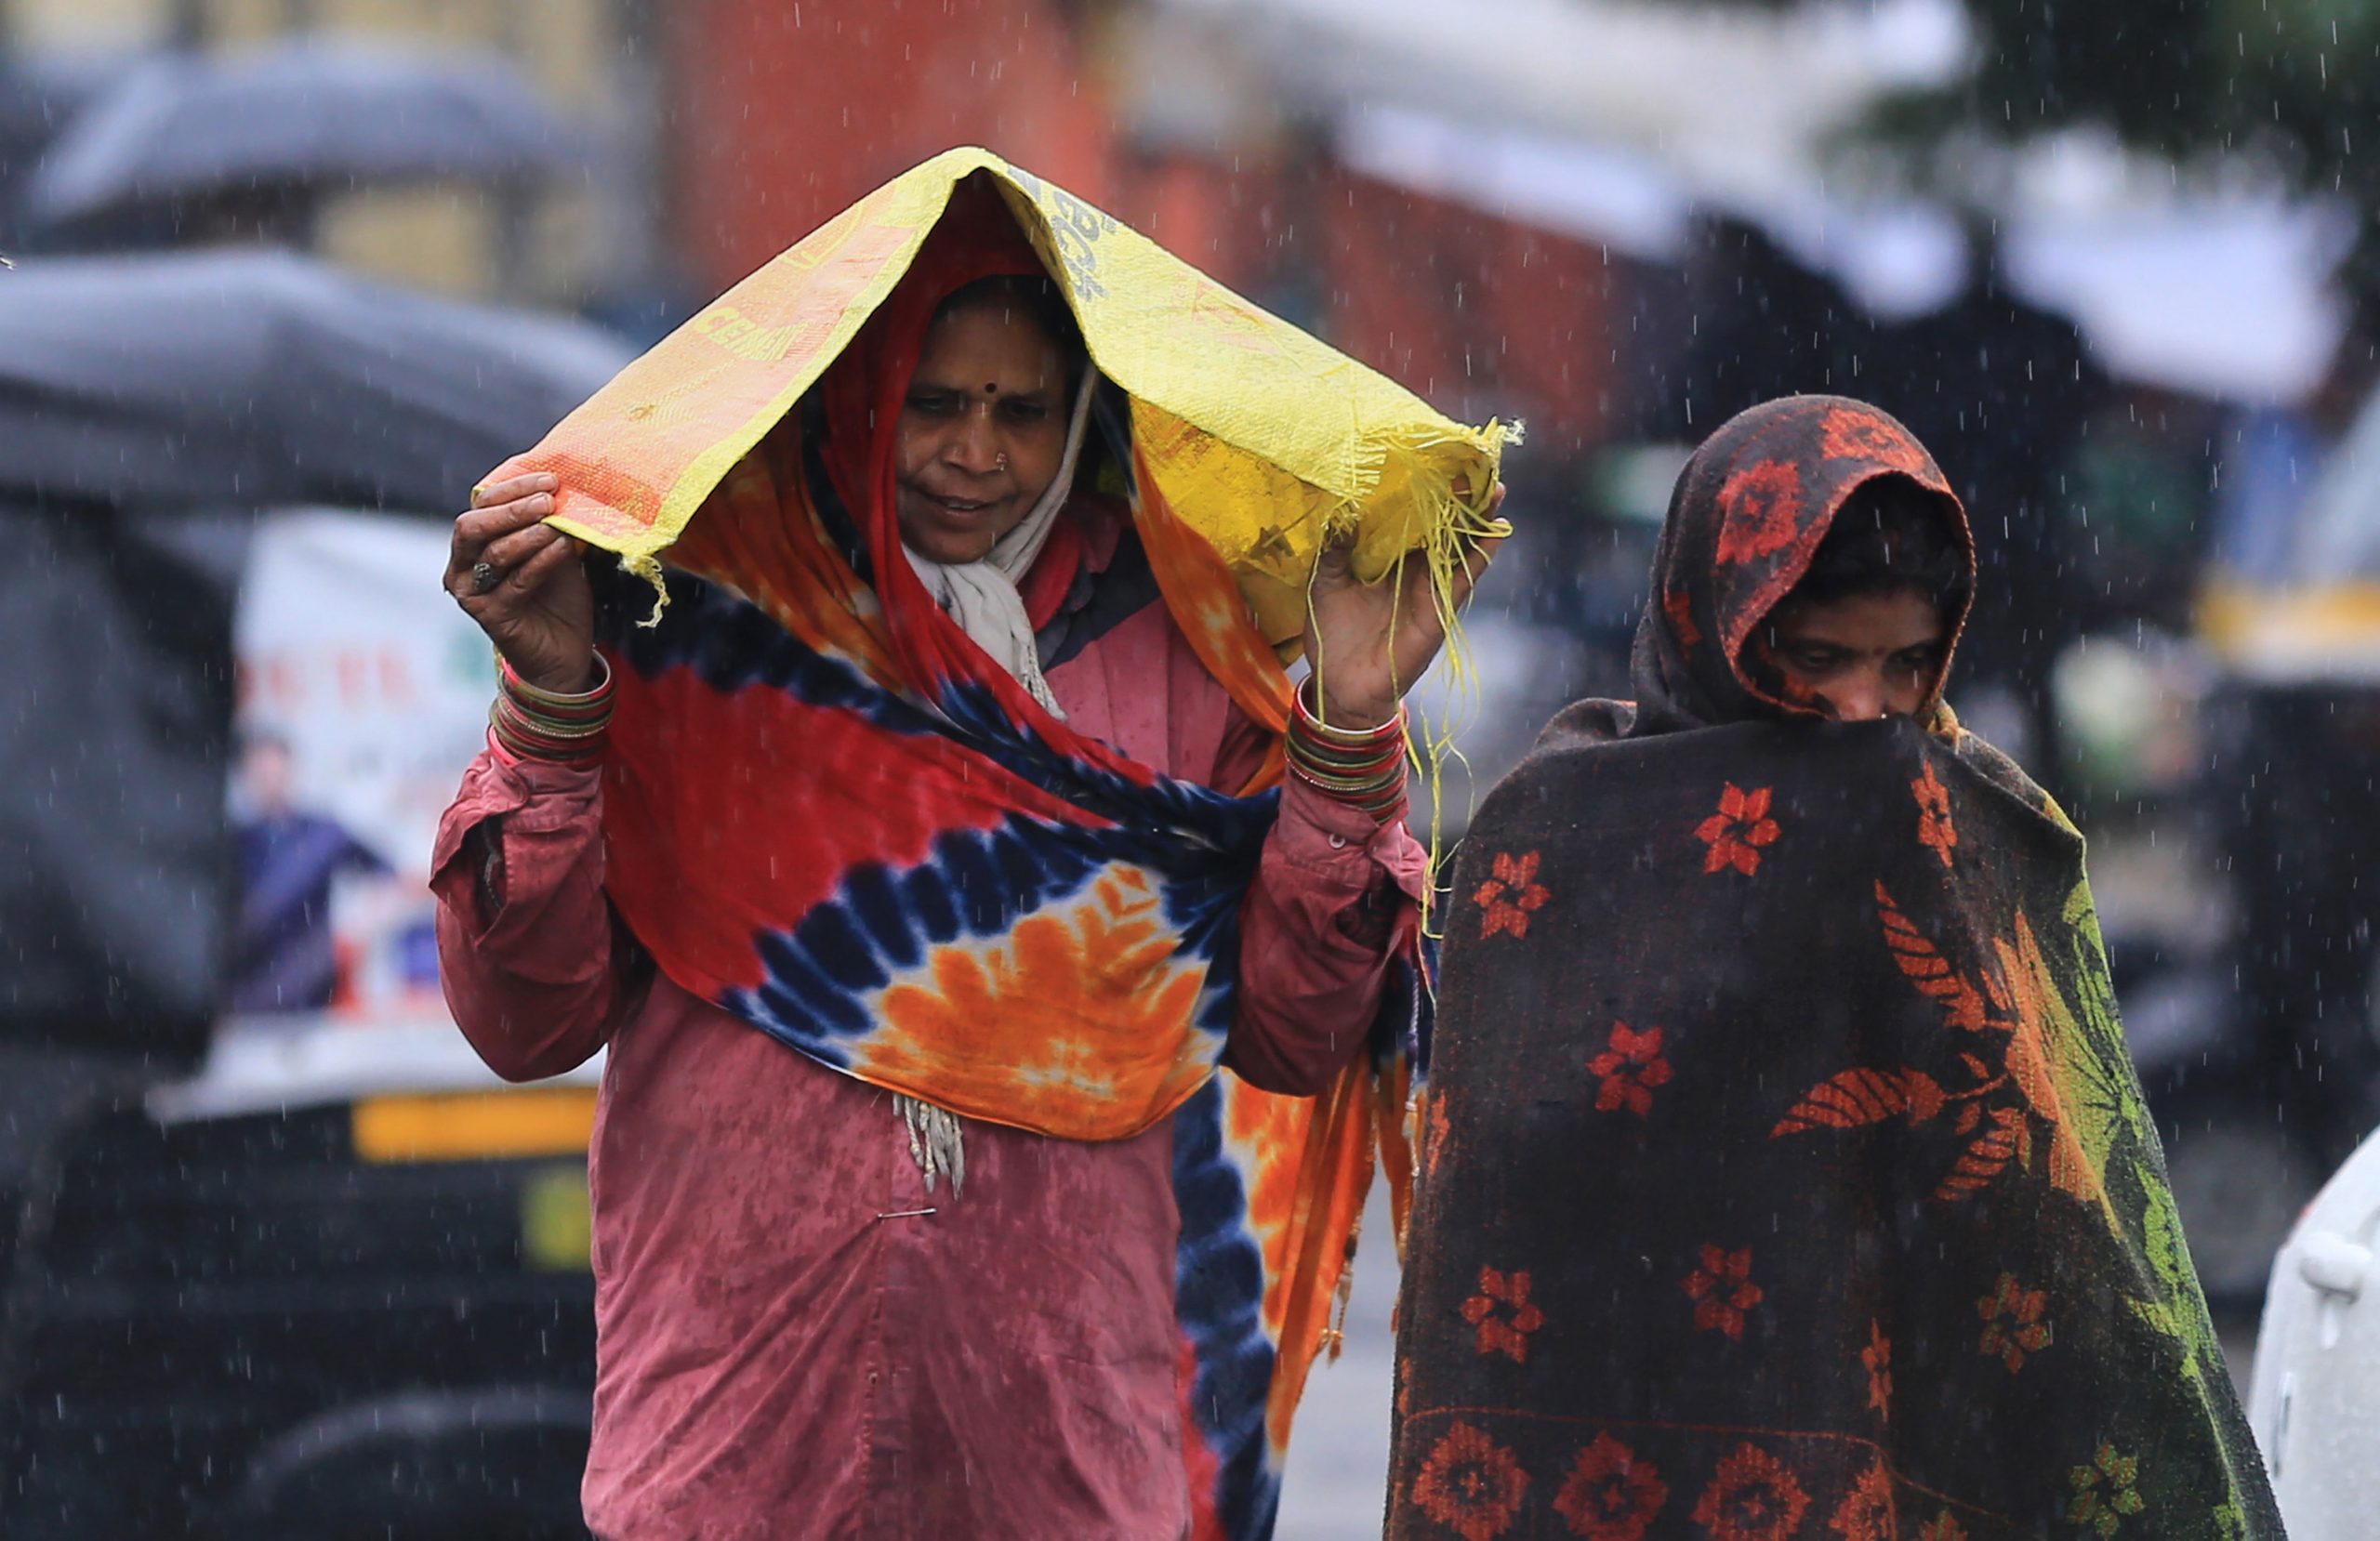 More than 1700 died due to extreme weather in India in 2021: IMD